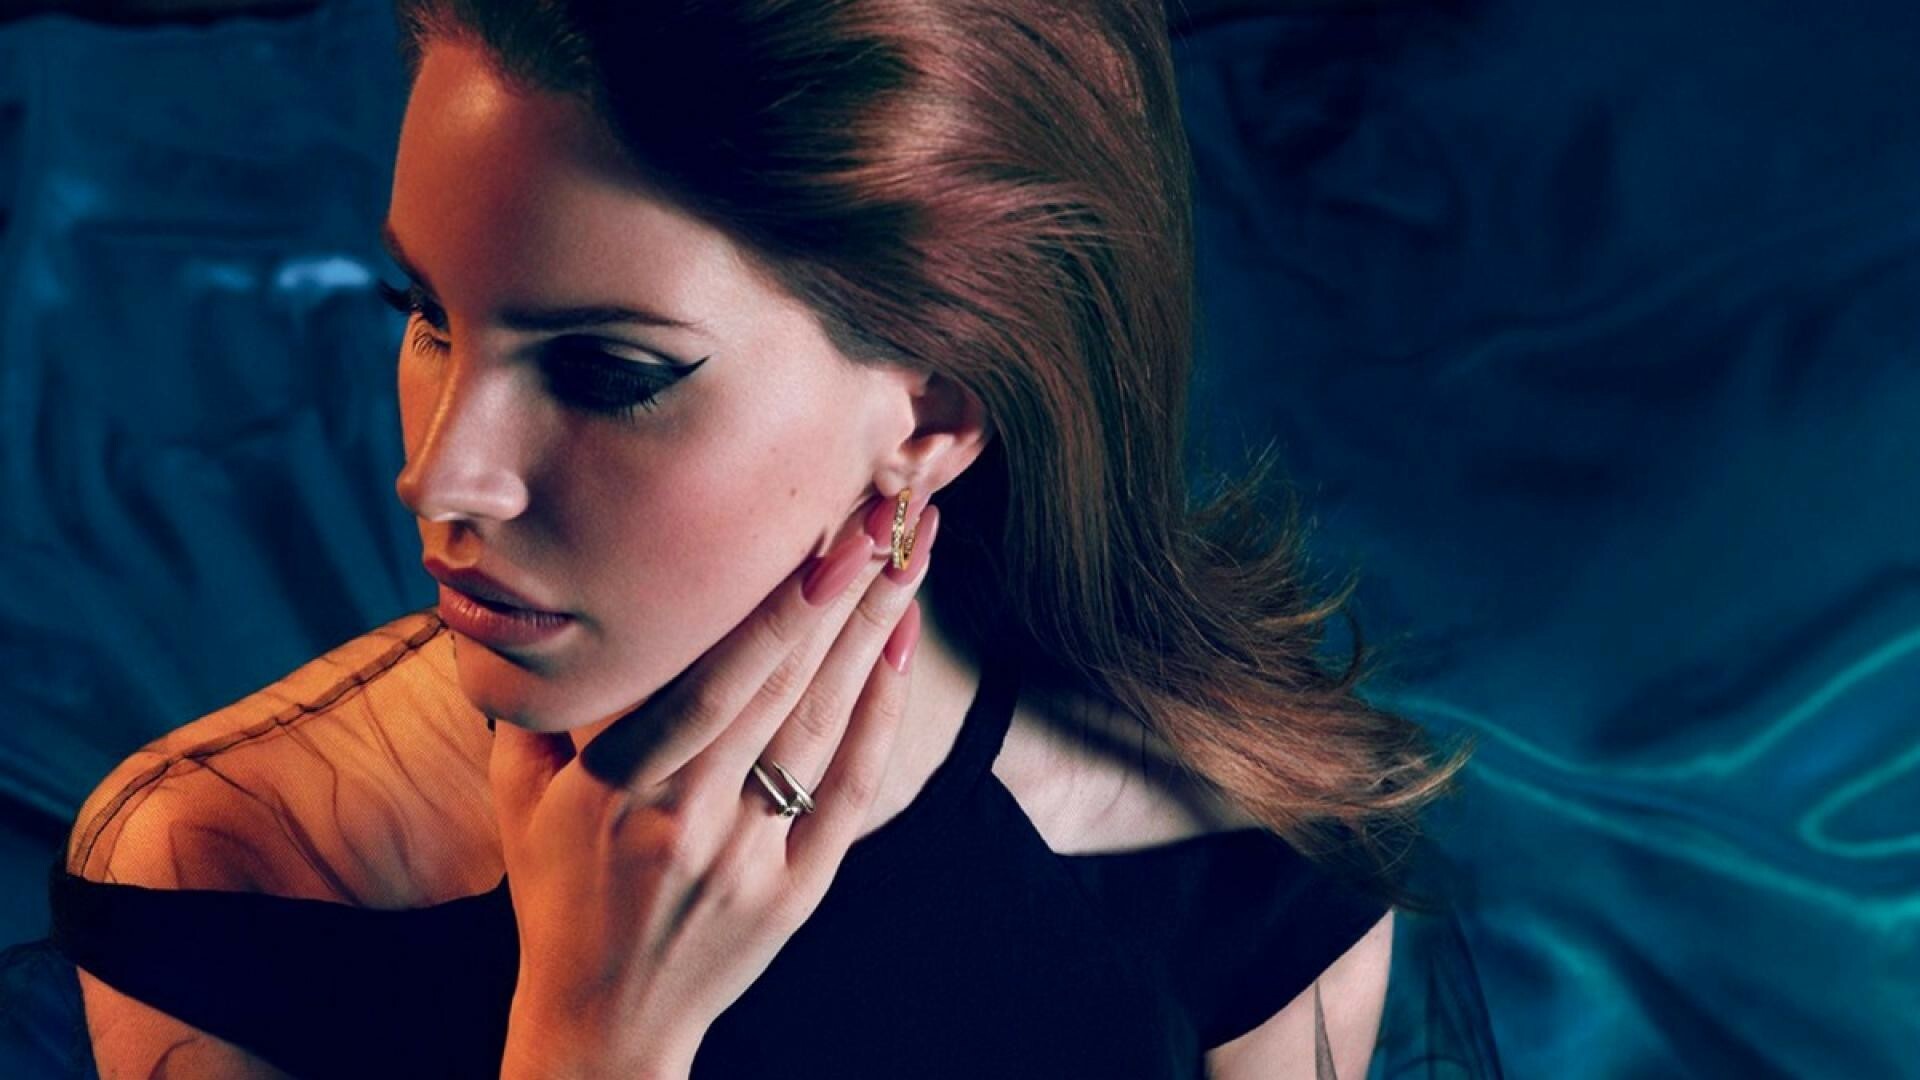 Lana Del Rey: A cover of “Once Upon a Dream”, The 2014 dark fantasy film Maleficent. 1920x1080 Full HD Background.